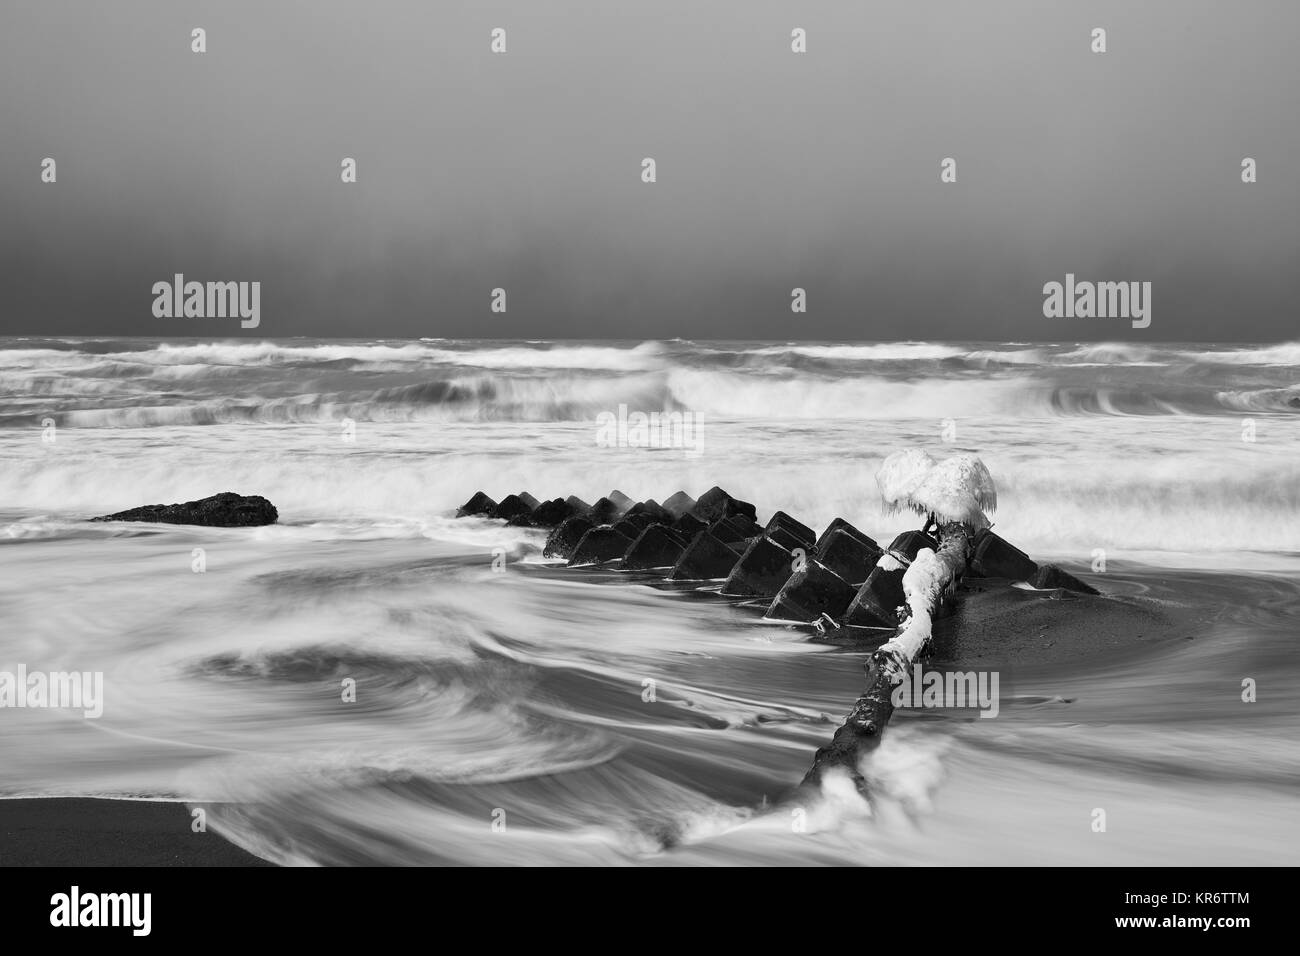 Snow-covered wave breakers on a rocky beach in winter. Stock Photo